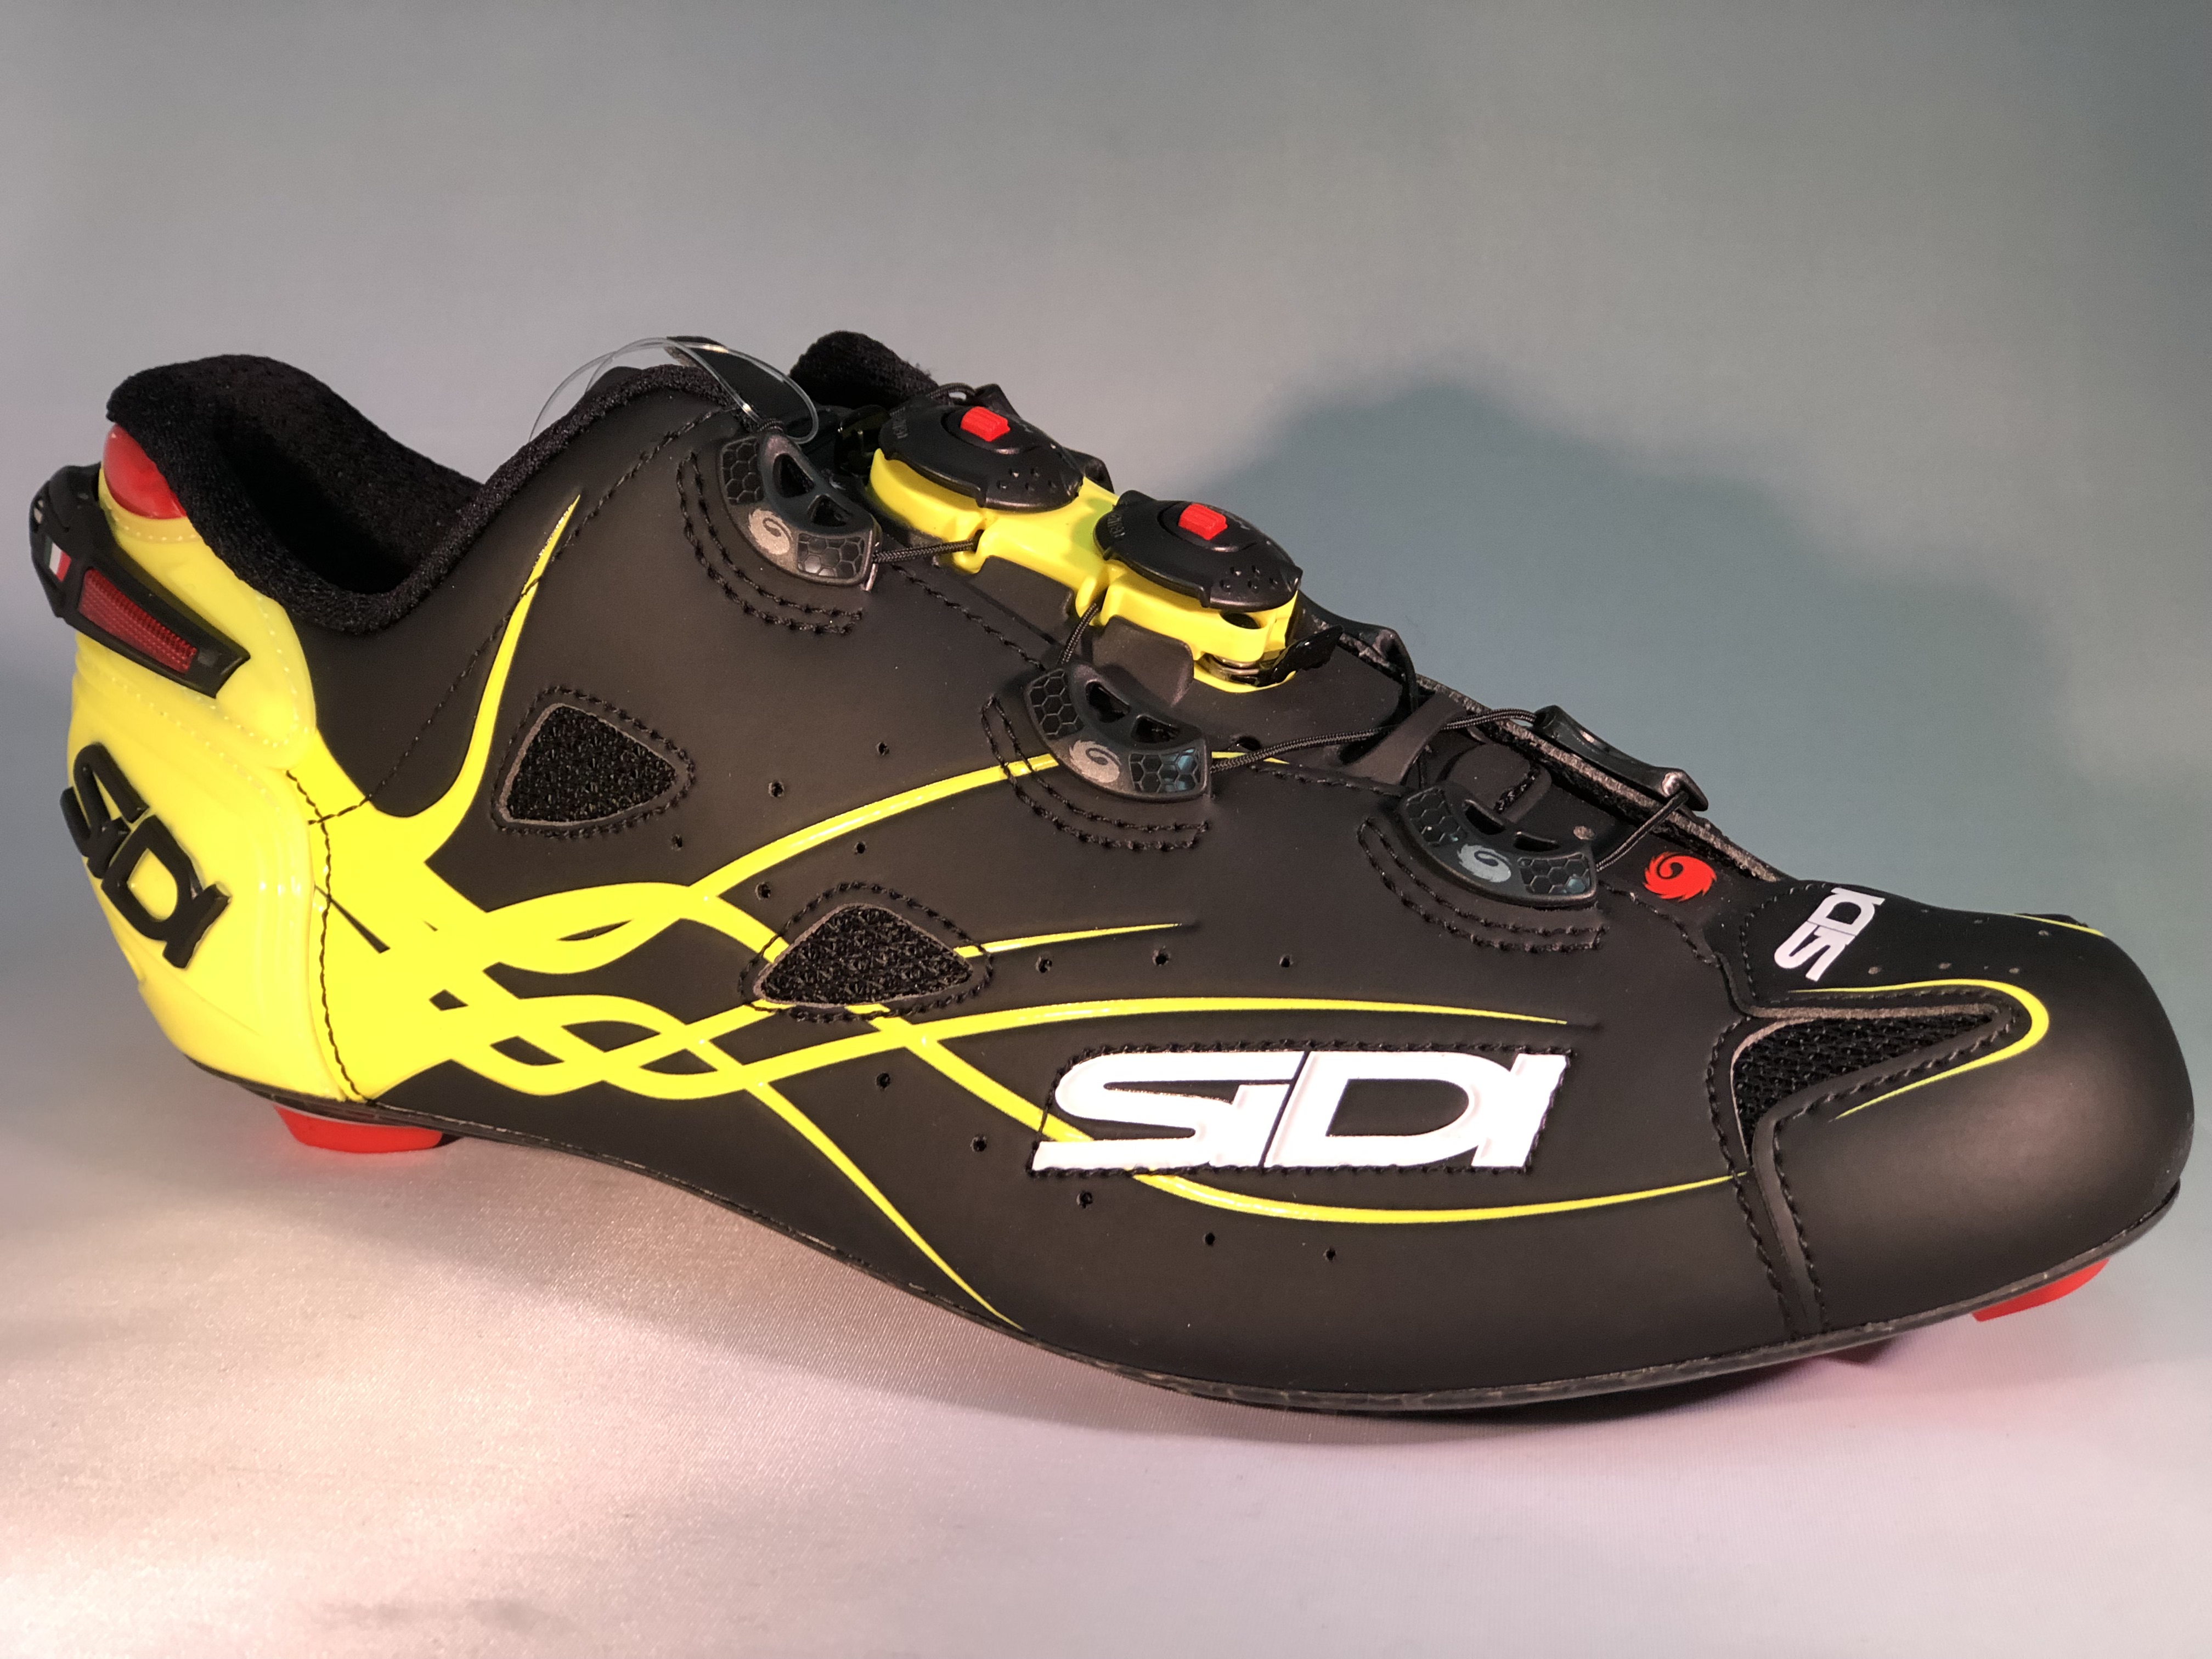 A pair of black and yellow cycling shoes.